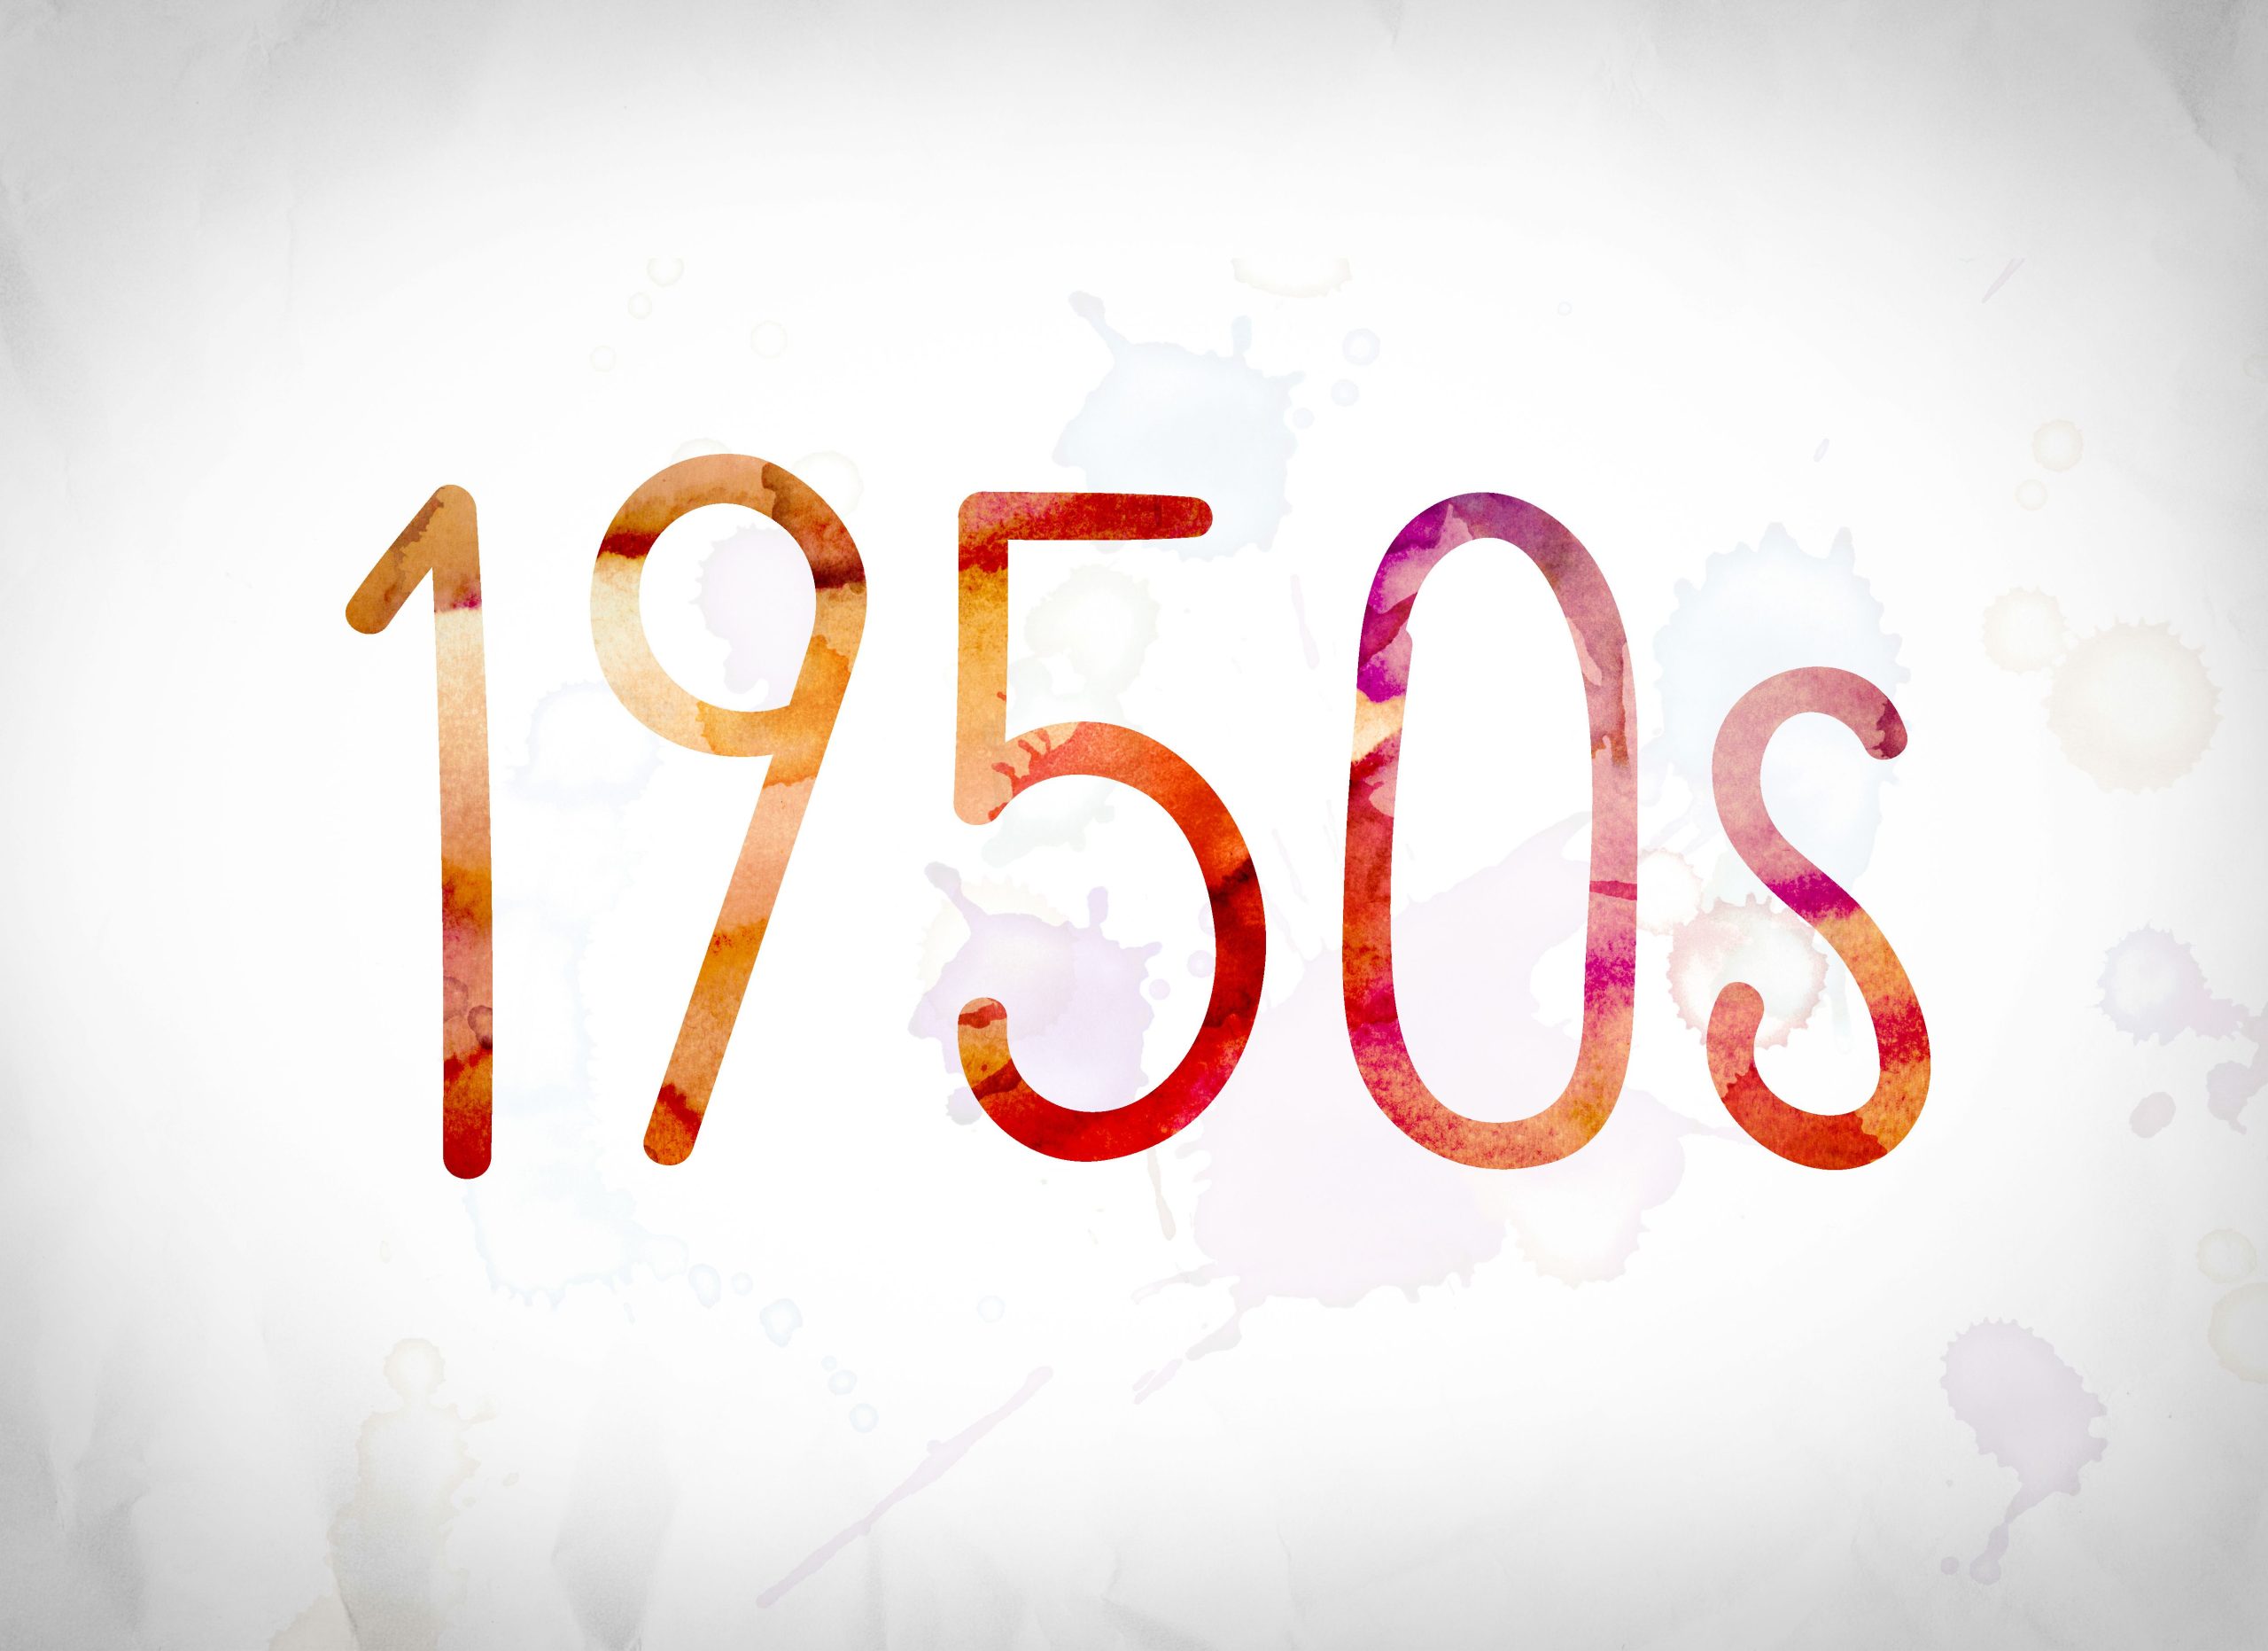 Video moments: A nostalgic nod to Britain in the 1950s